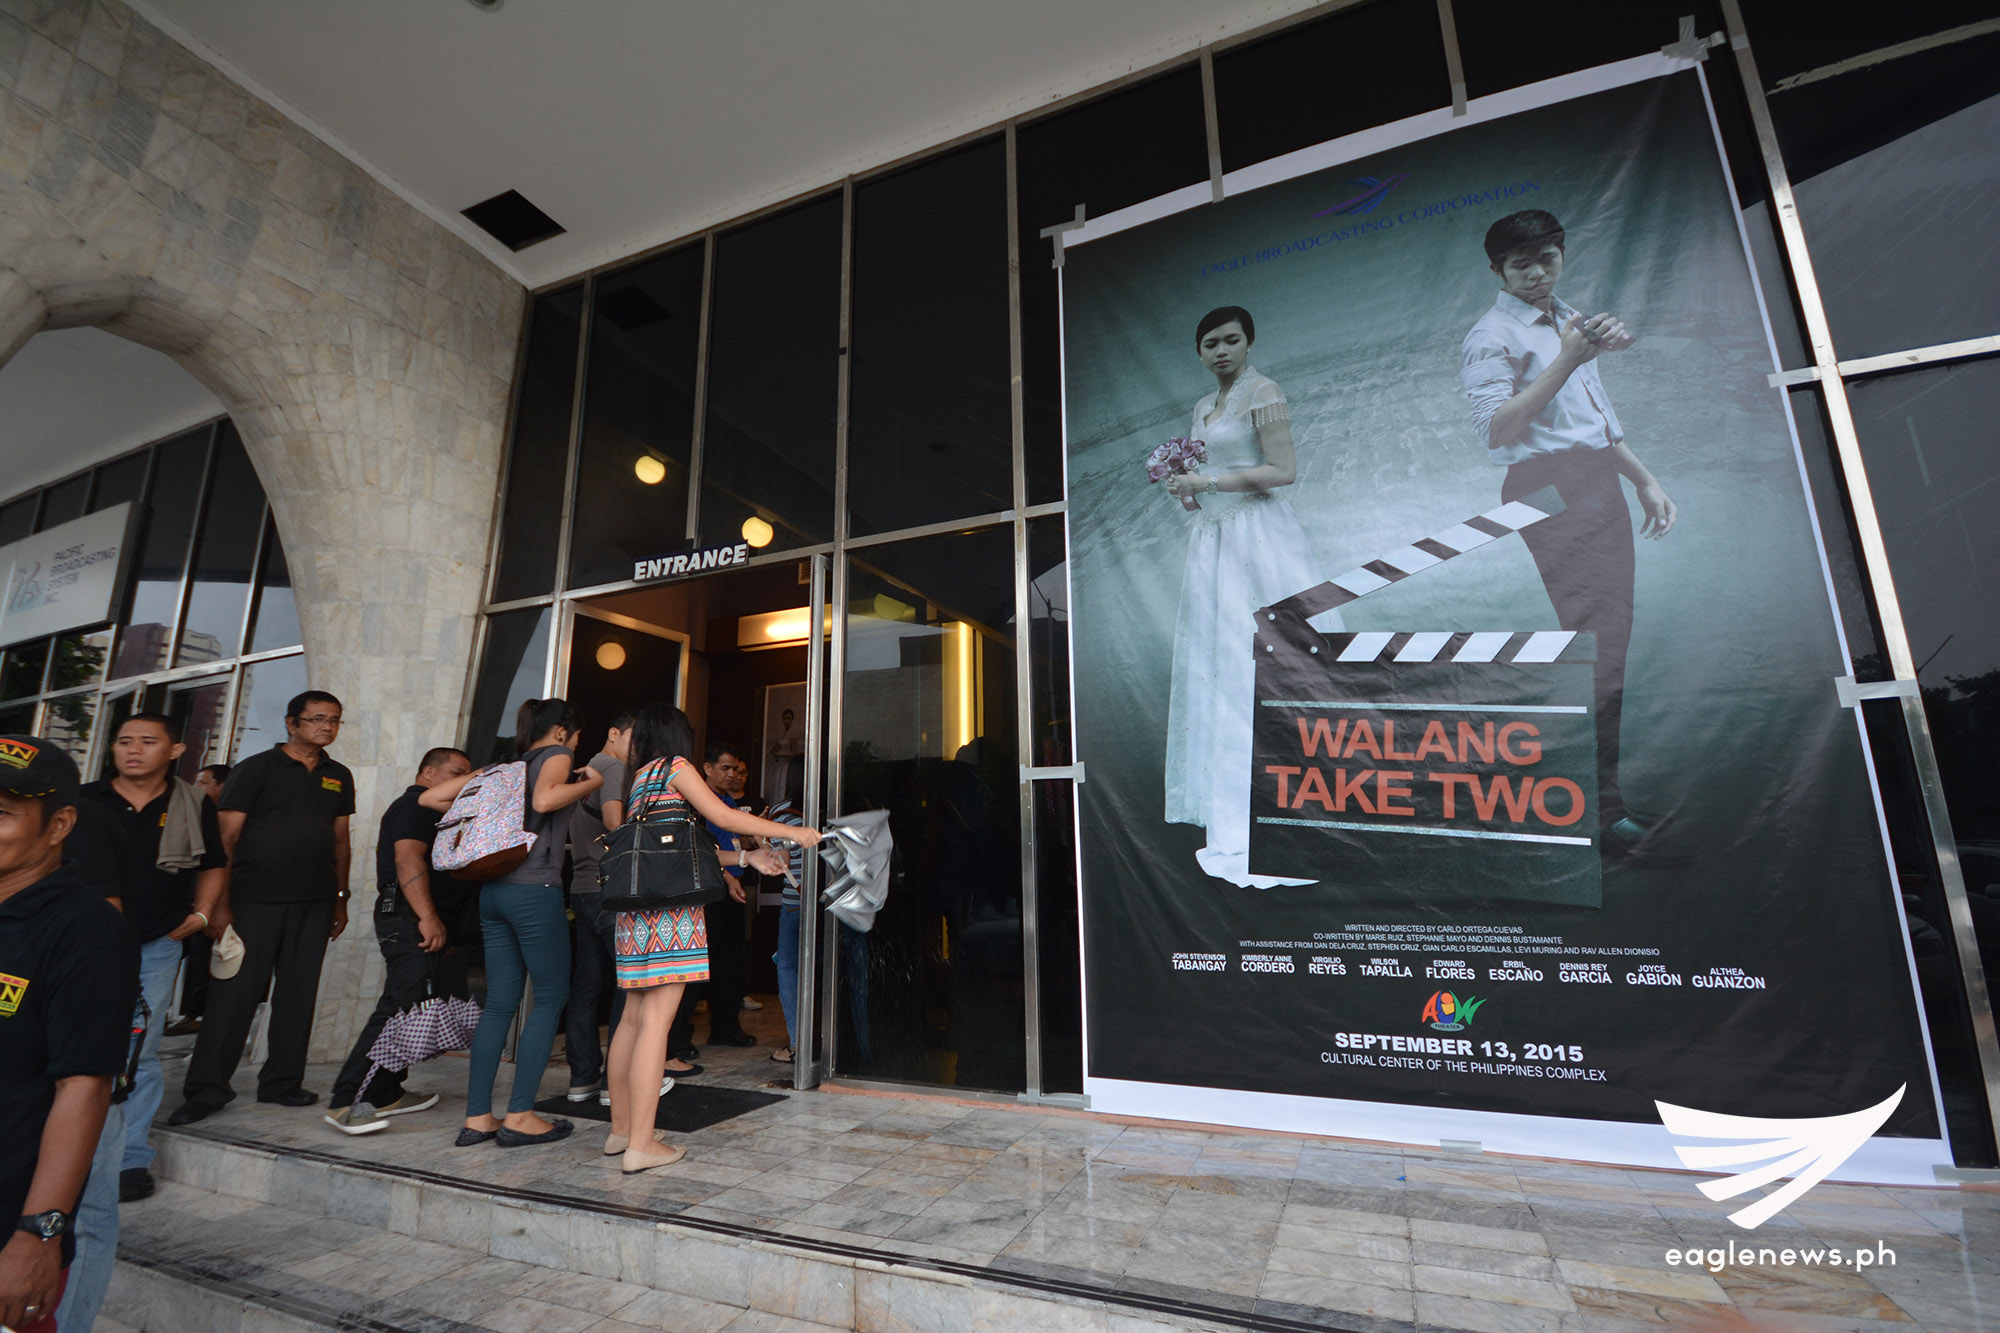 (File photo) The poster of the Philippines' INCinema Film, "Walang Take Two" posted during its Philippine premiere at the Aliw Theater on September 13, 2015. The film recently received three nominations from the Madrid International Film Festival: Best Cinematography in a Foreign Language Film, Best Director of a Foreign Language Feature Film, and Best Film. (Eagle News Service)